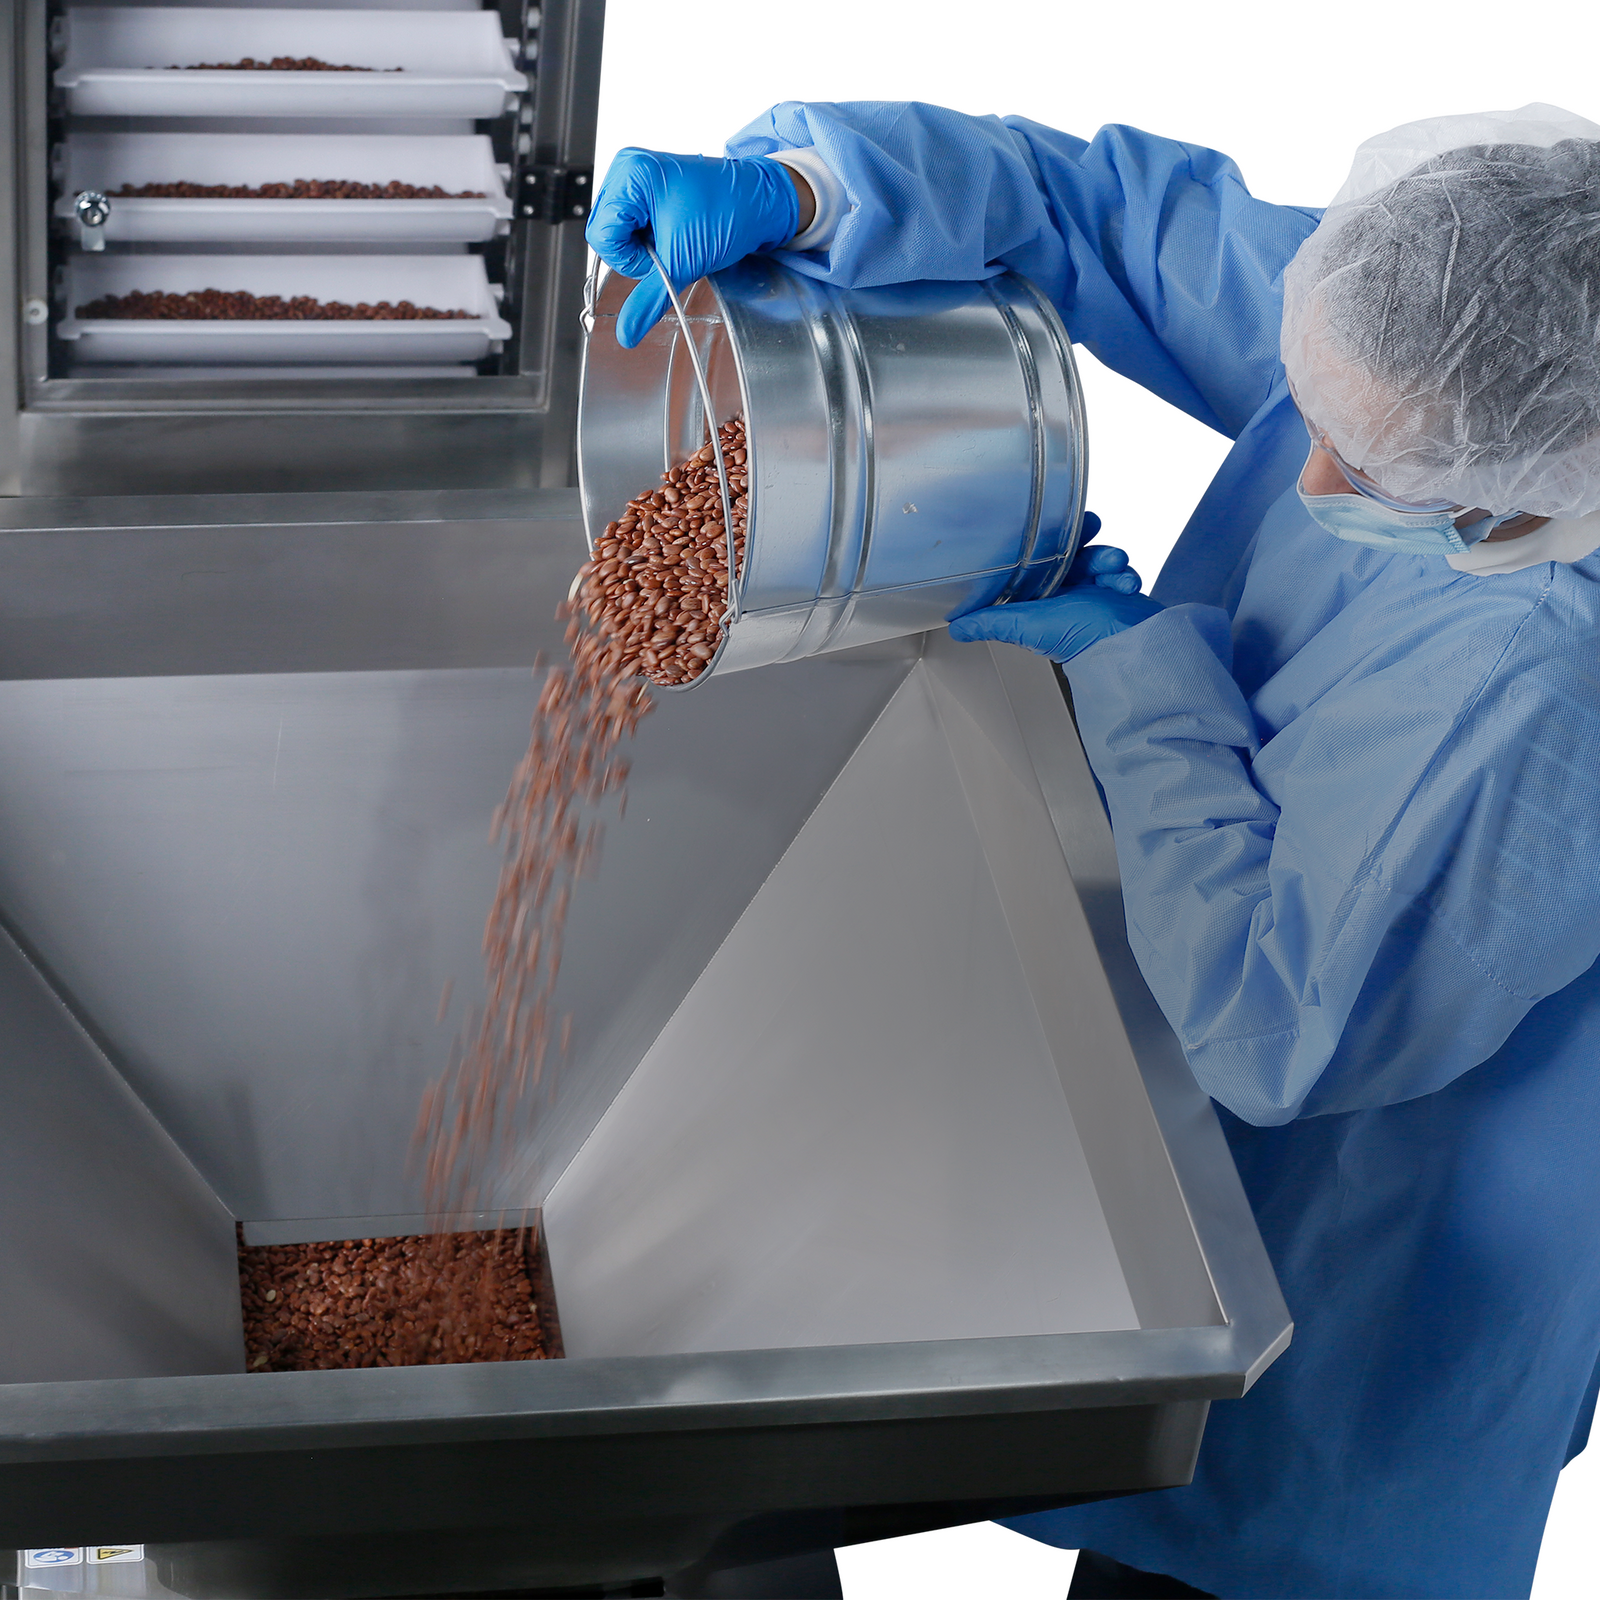 A worker wearing disposable personal protection clothing pouring a large amount of grains into the hopper of the vibratory feeder. Feeder is positioned besides the bucket elevator and grains are been transported through the elevator conveyor